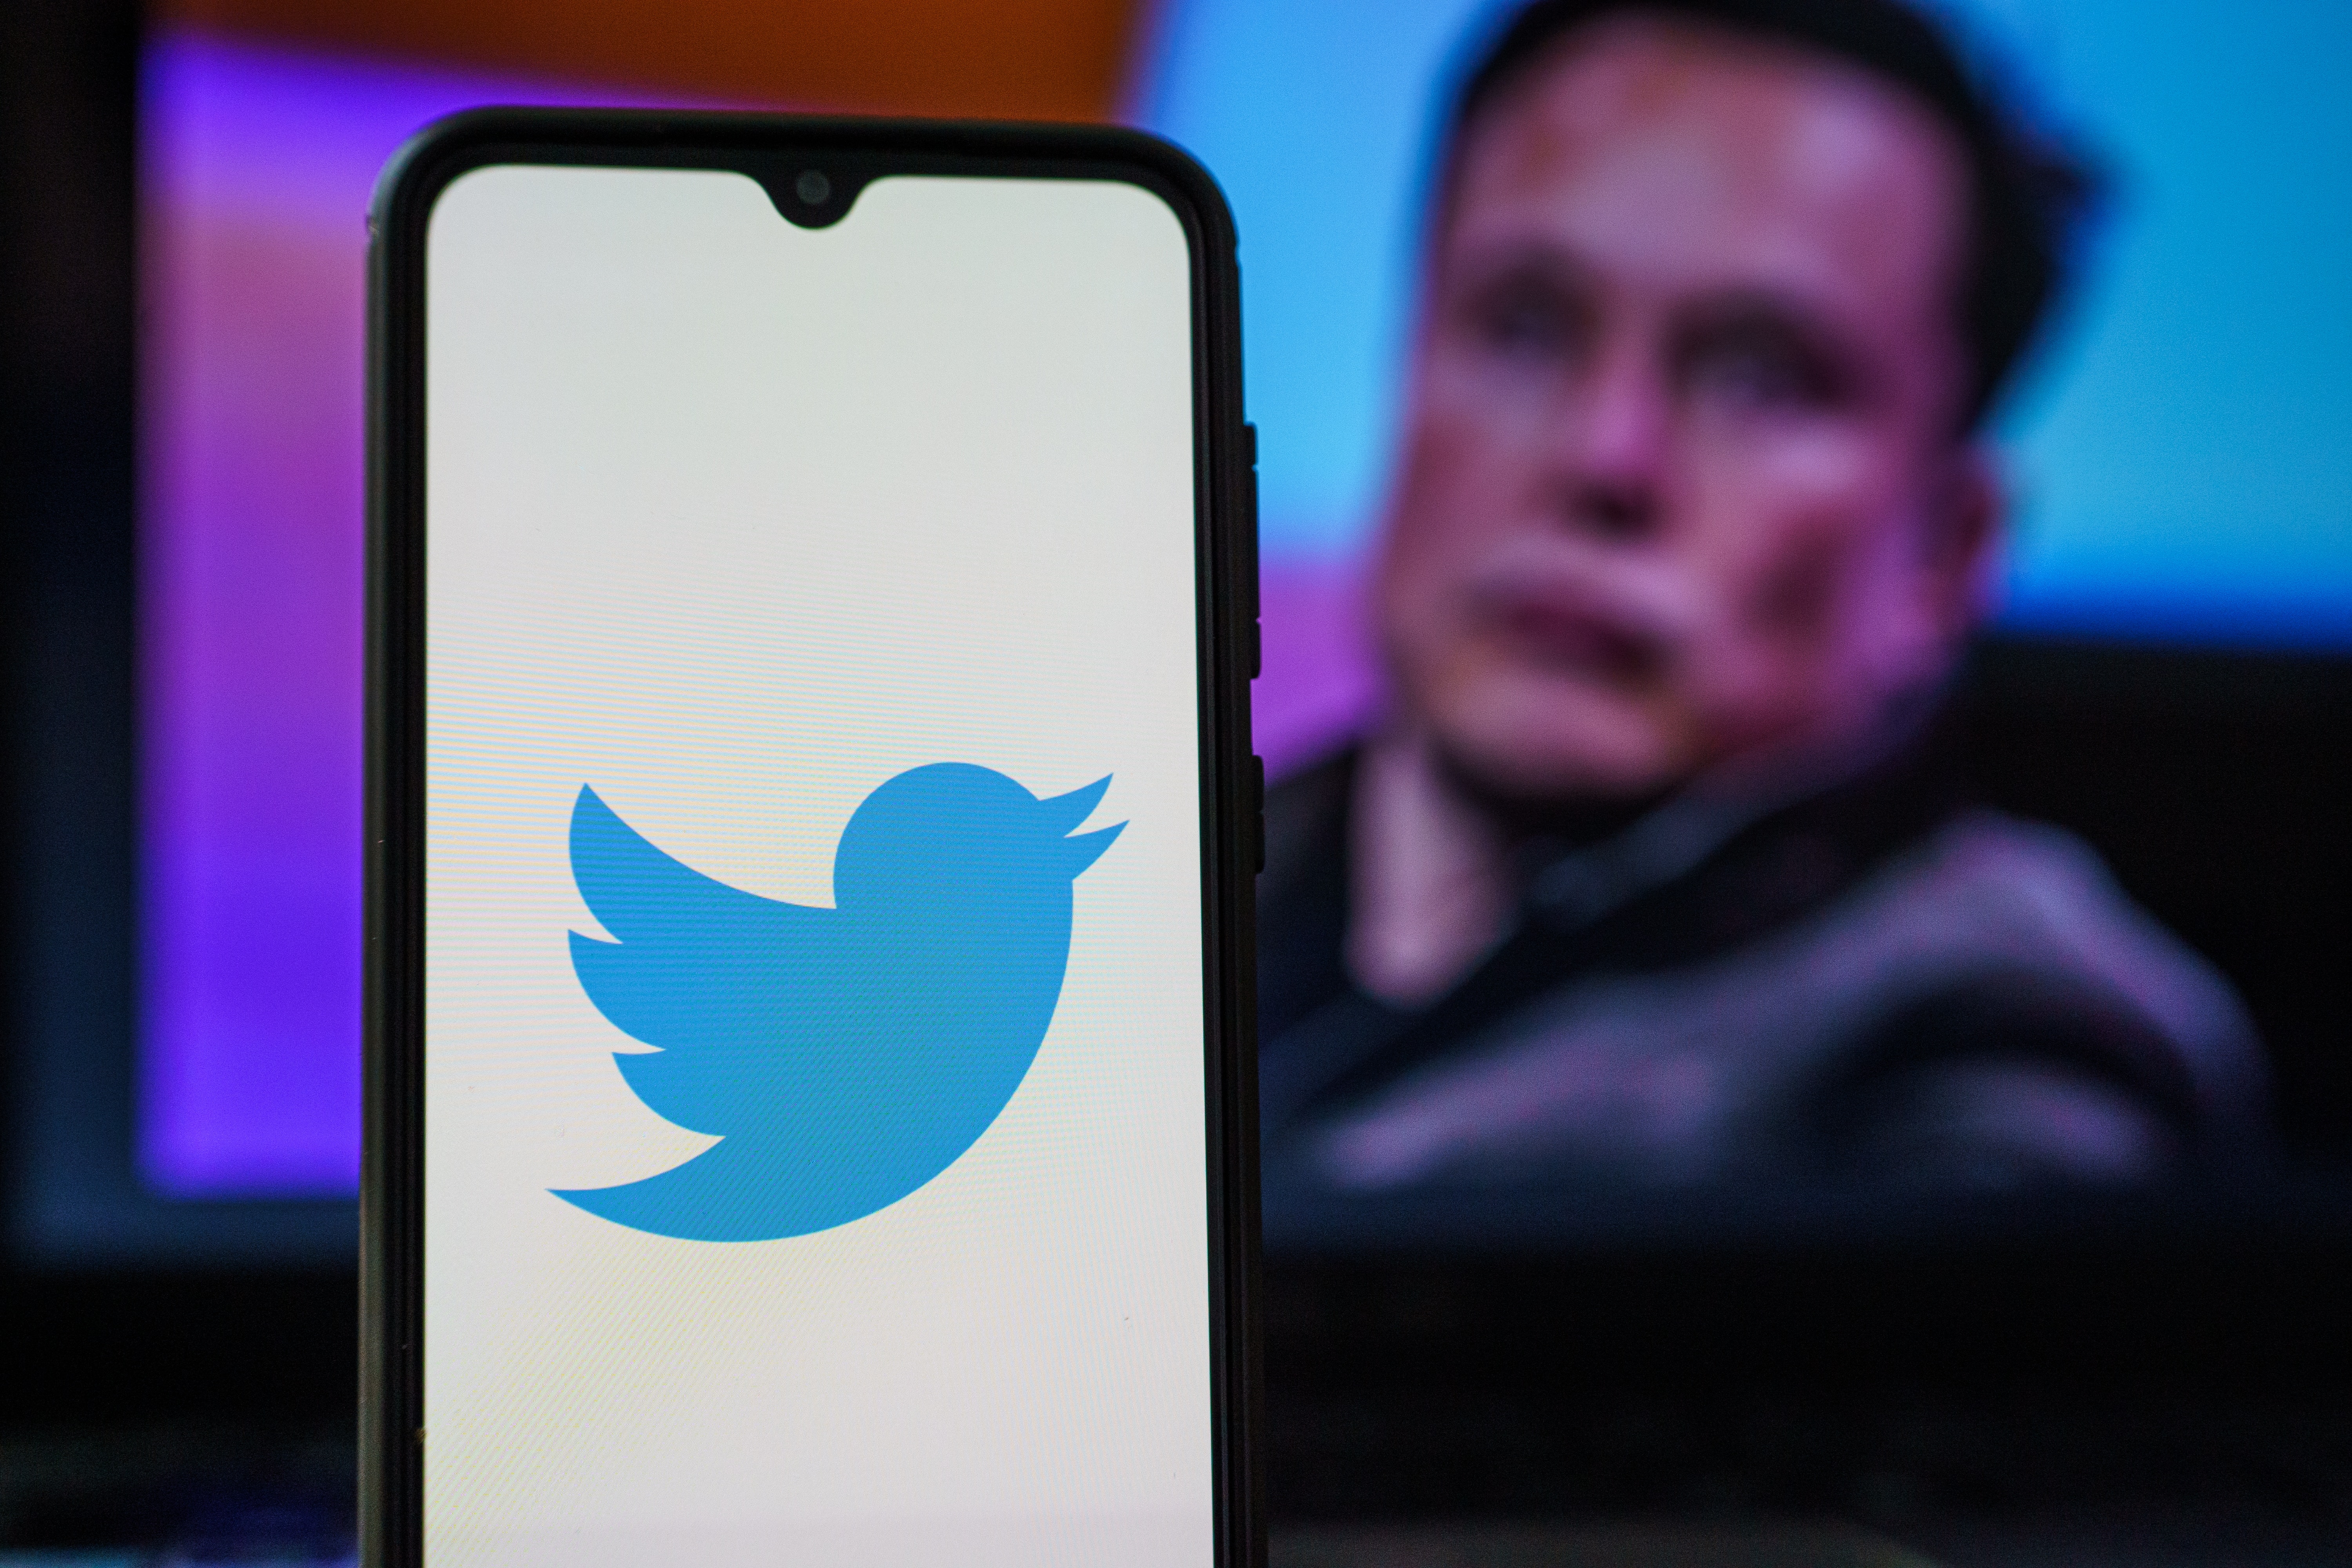 Rest In Peace 'Twitter For iPhone:' Elon Musk Dubs Label A 'Waste of Space & Compute'